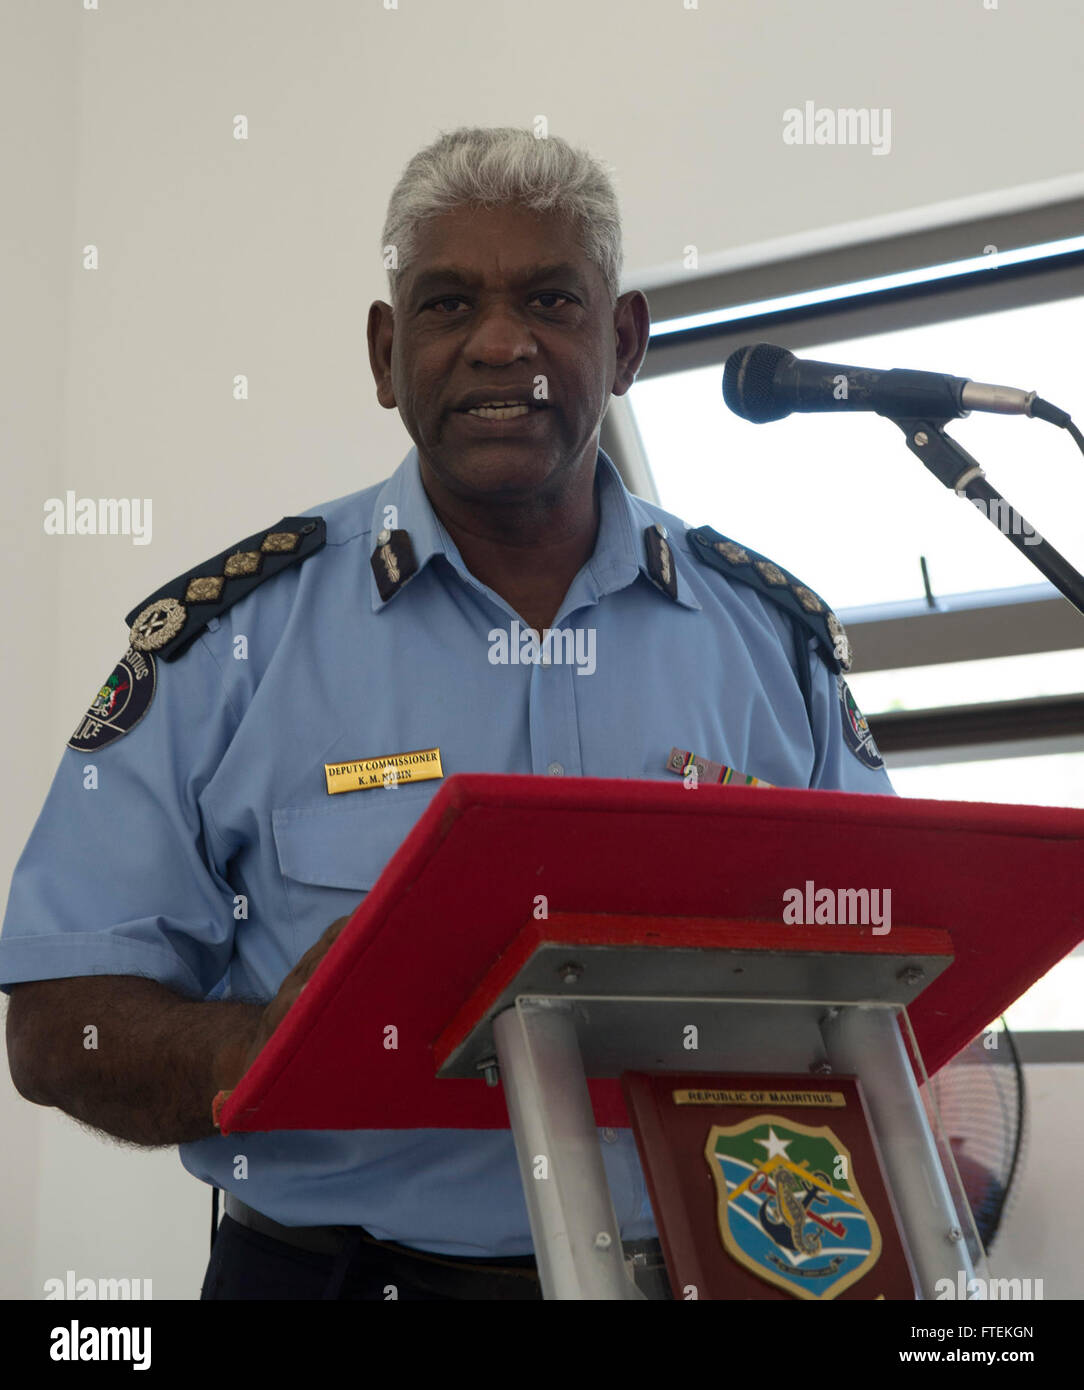 150128-N-QY759-075 LE CHALAND, Mauritius (Jan. 28, 2015) Mauritian Deputy Commissioner of Police Mario Nobin addresses attendees during the opening ceremony of Exercise Cutlass Express 2015, Jan. 28. Exercise Cutlass Express 2015, sponsored by U.S. Africa Command, is designed to improve regional cooperation, maritime domain awareness, and information sharing practices to increase capabilities of East African and Indian Ocean nations to counter sea-based illicit activity. (U.S. Navy photo by Mass Communication Specialist 1st Class David R. Krigbaum/Released) Stock Photo